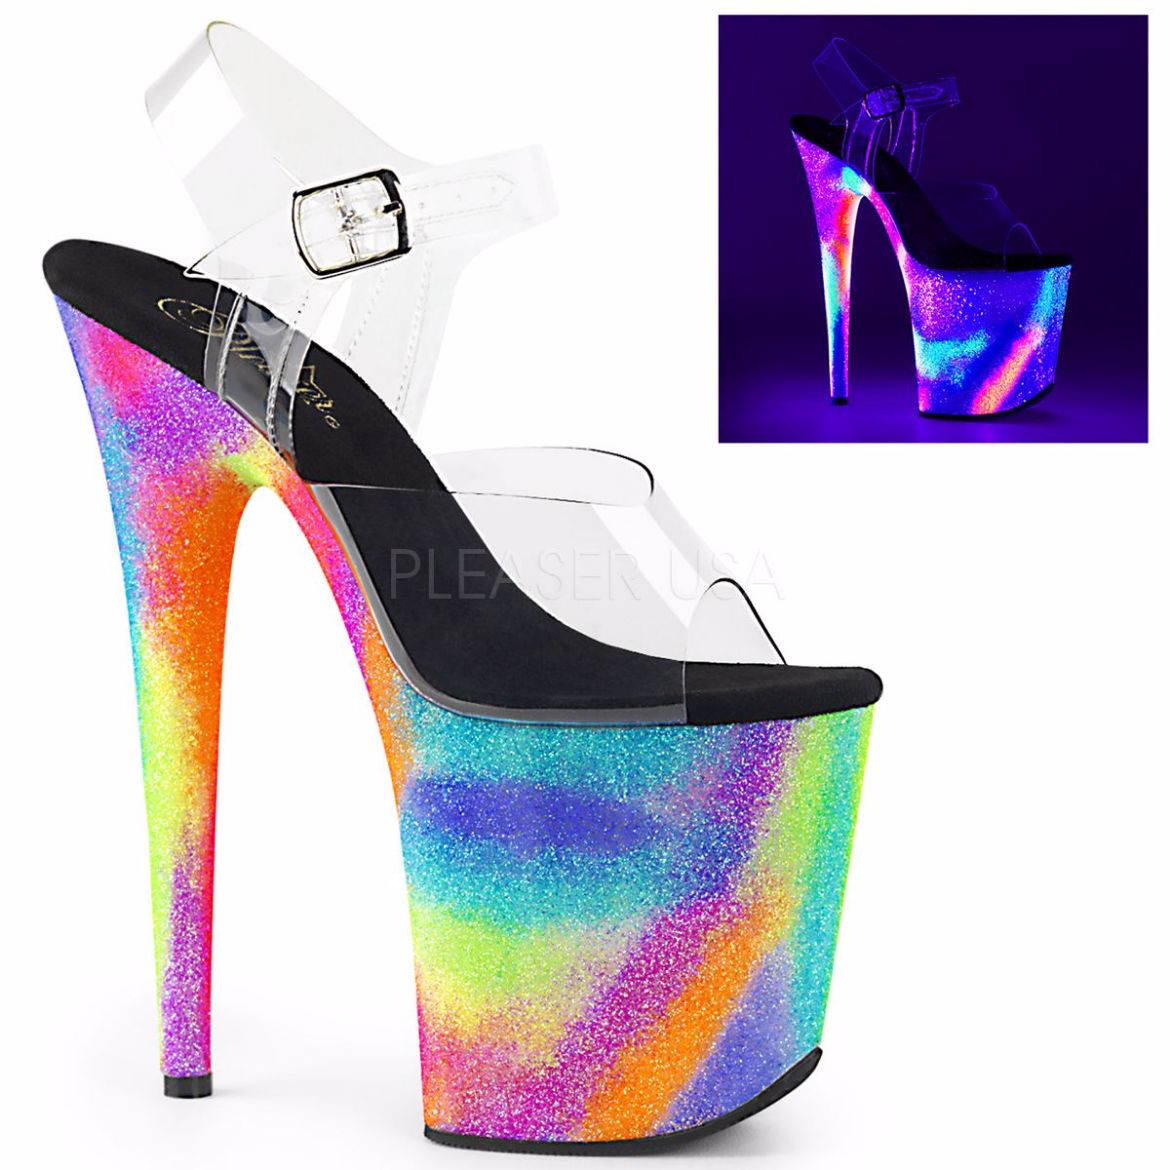 Product image of Pleaser Flamingo-808Gxy Clear/Neon Glitter, 8 inch (20.3 cm) Heel, 4 inch (10.2 cm) Platform Sandal Shoes